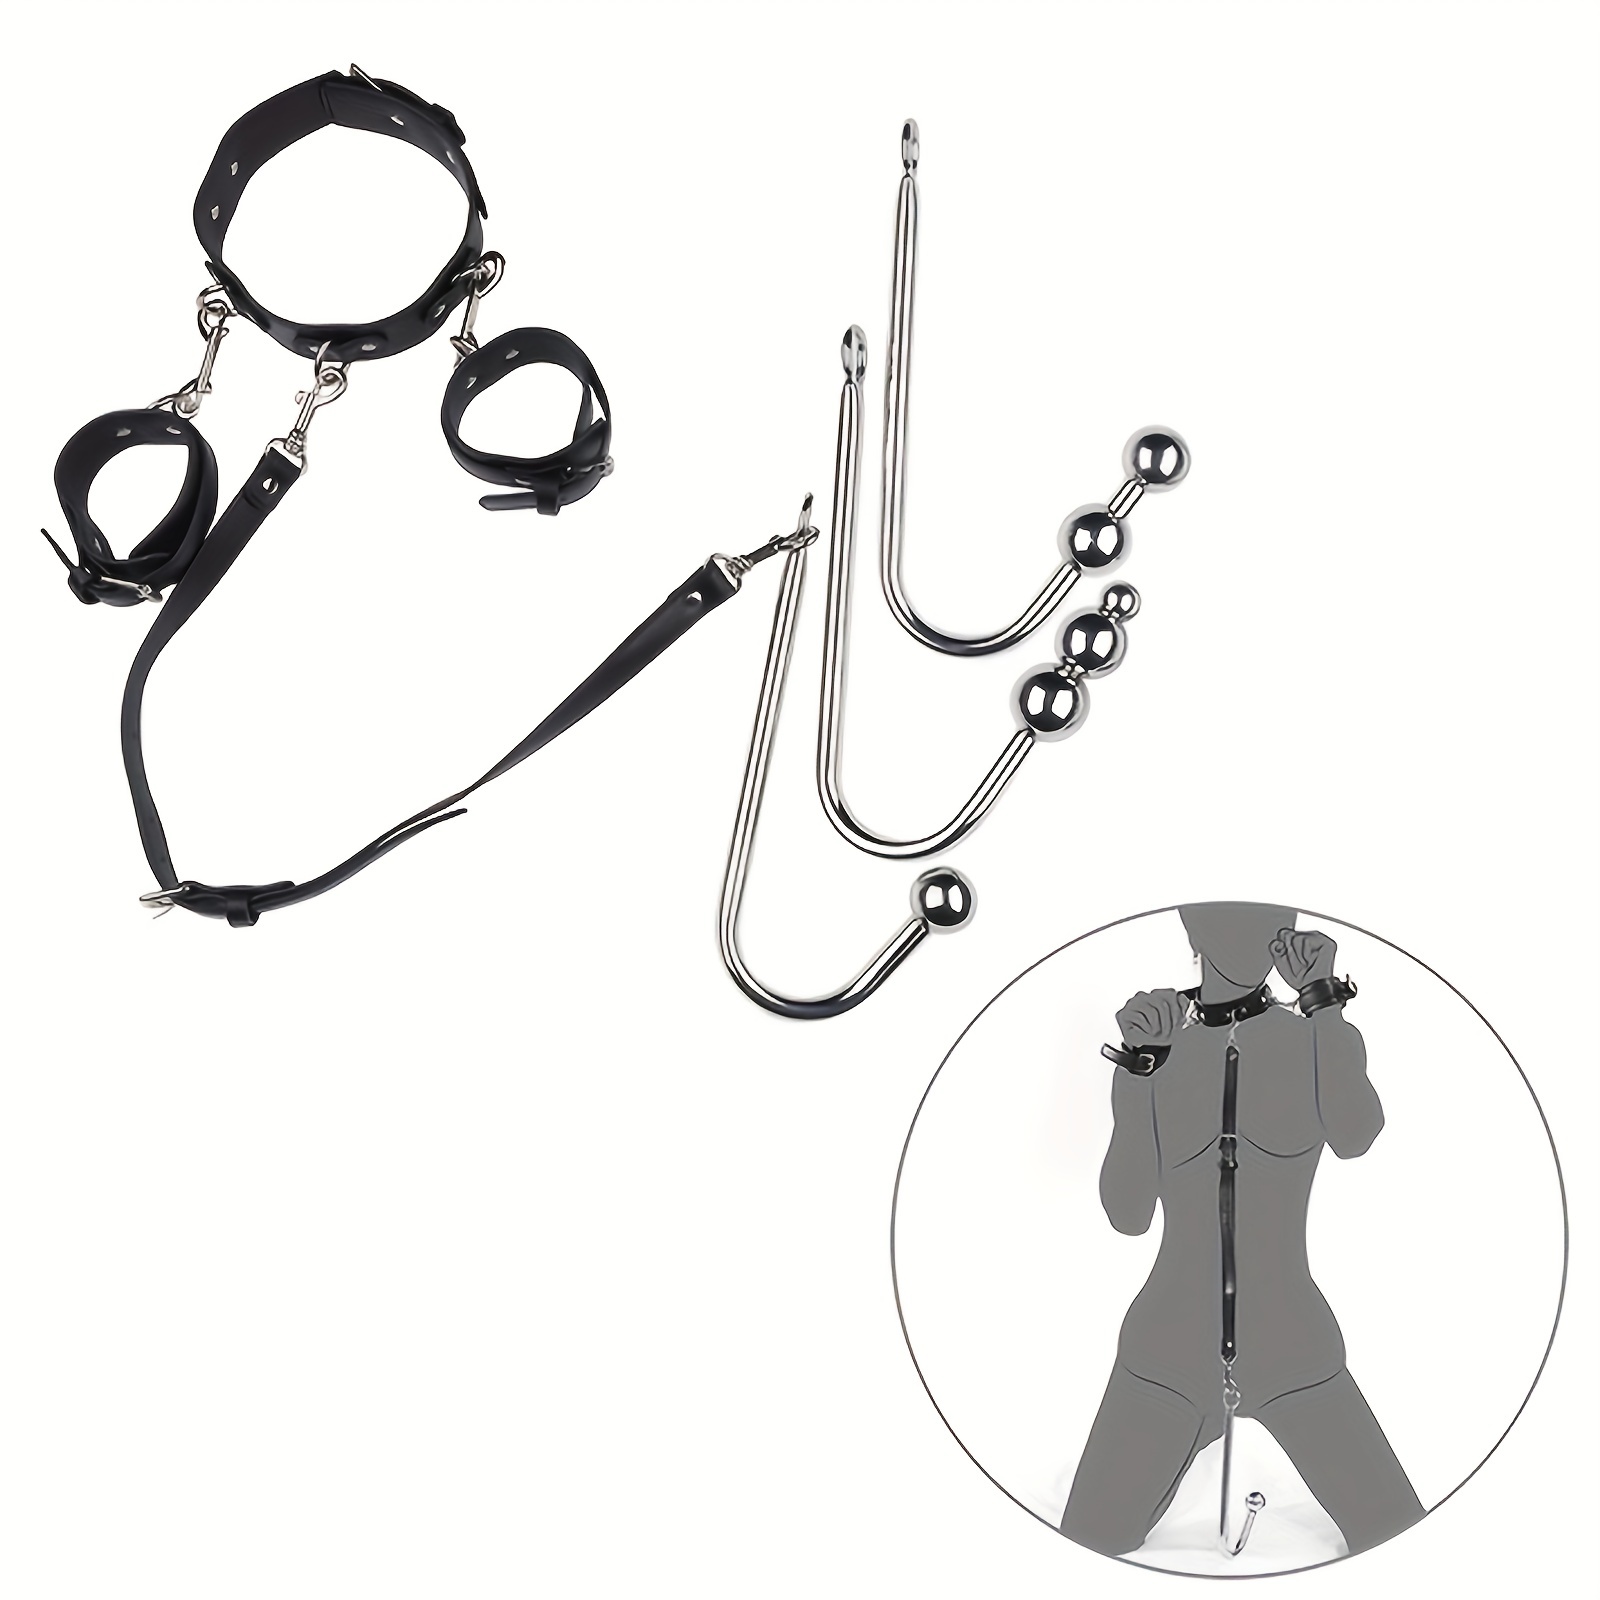 Collar PU Leather With Nipple Clamps BDSM SM Bondage Play Sex Toy for Women  Men